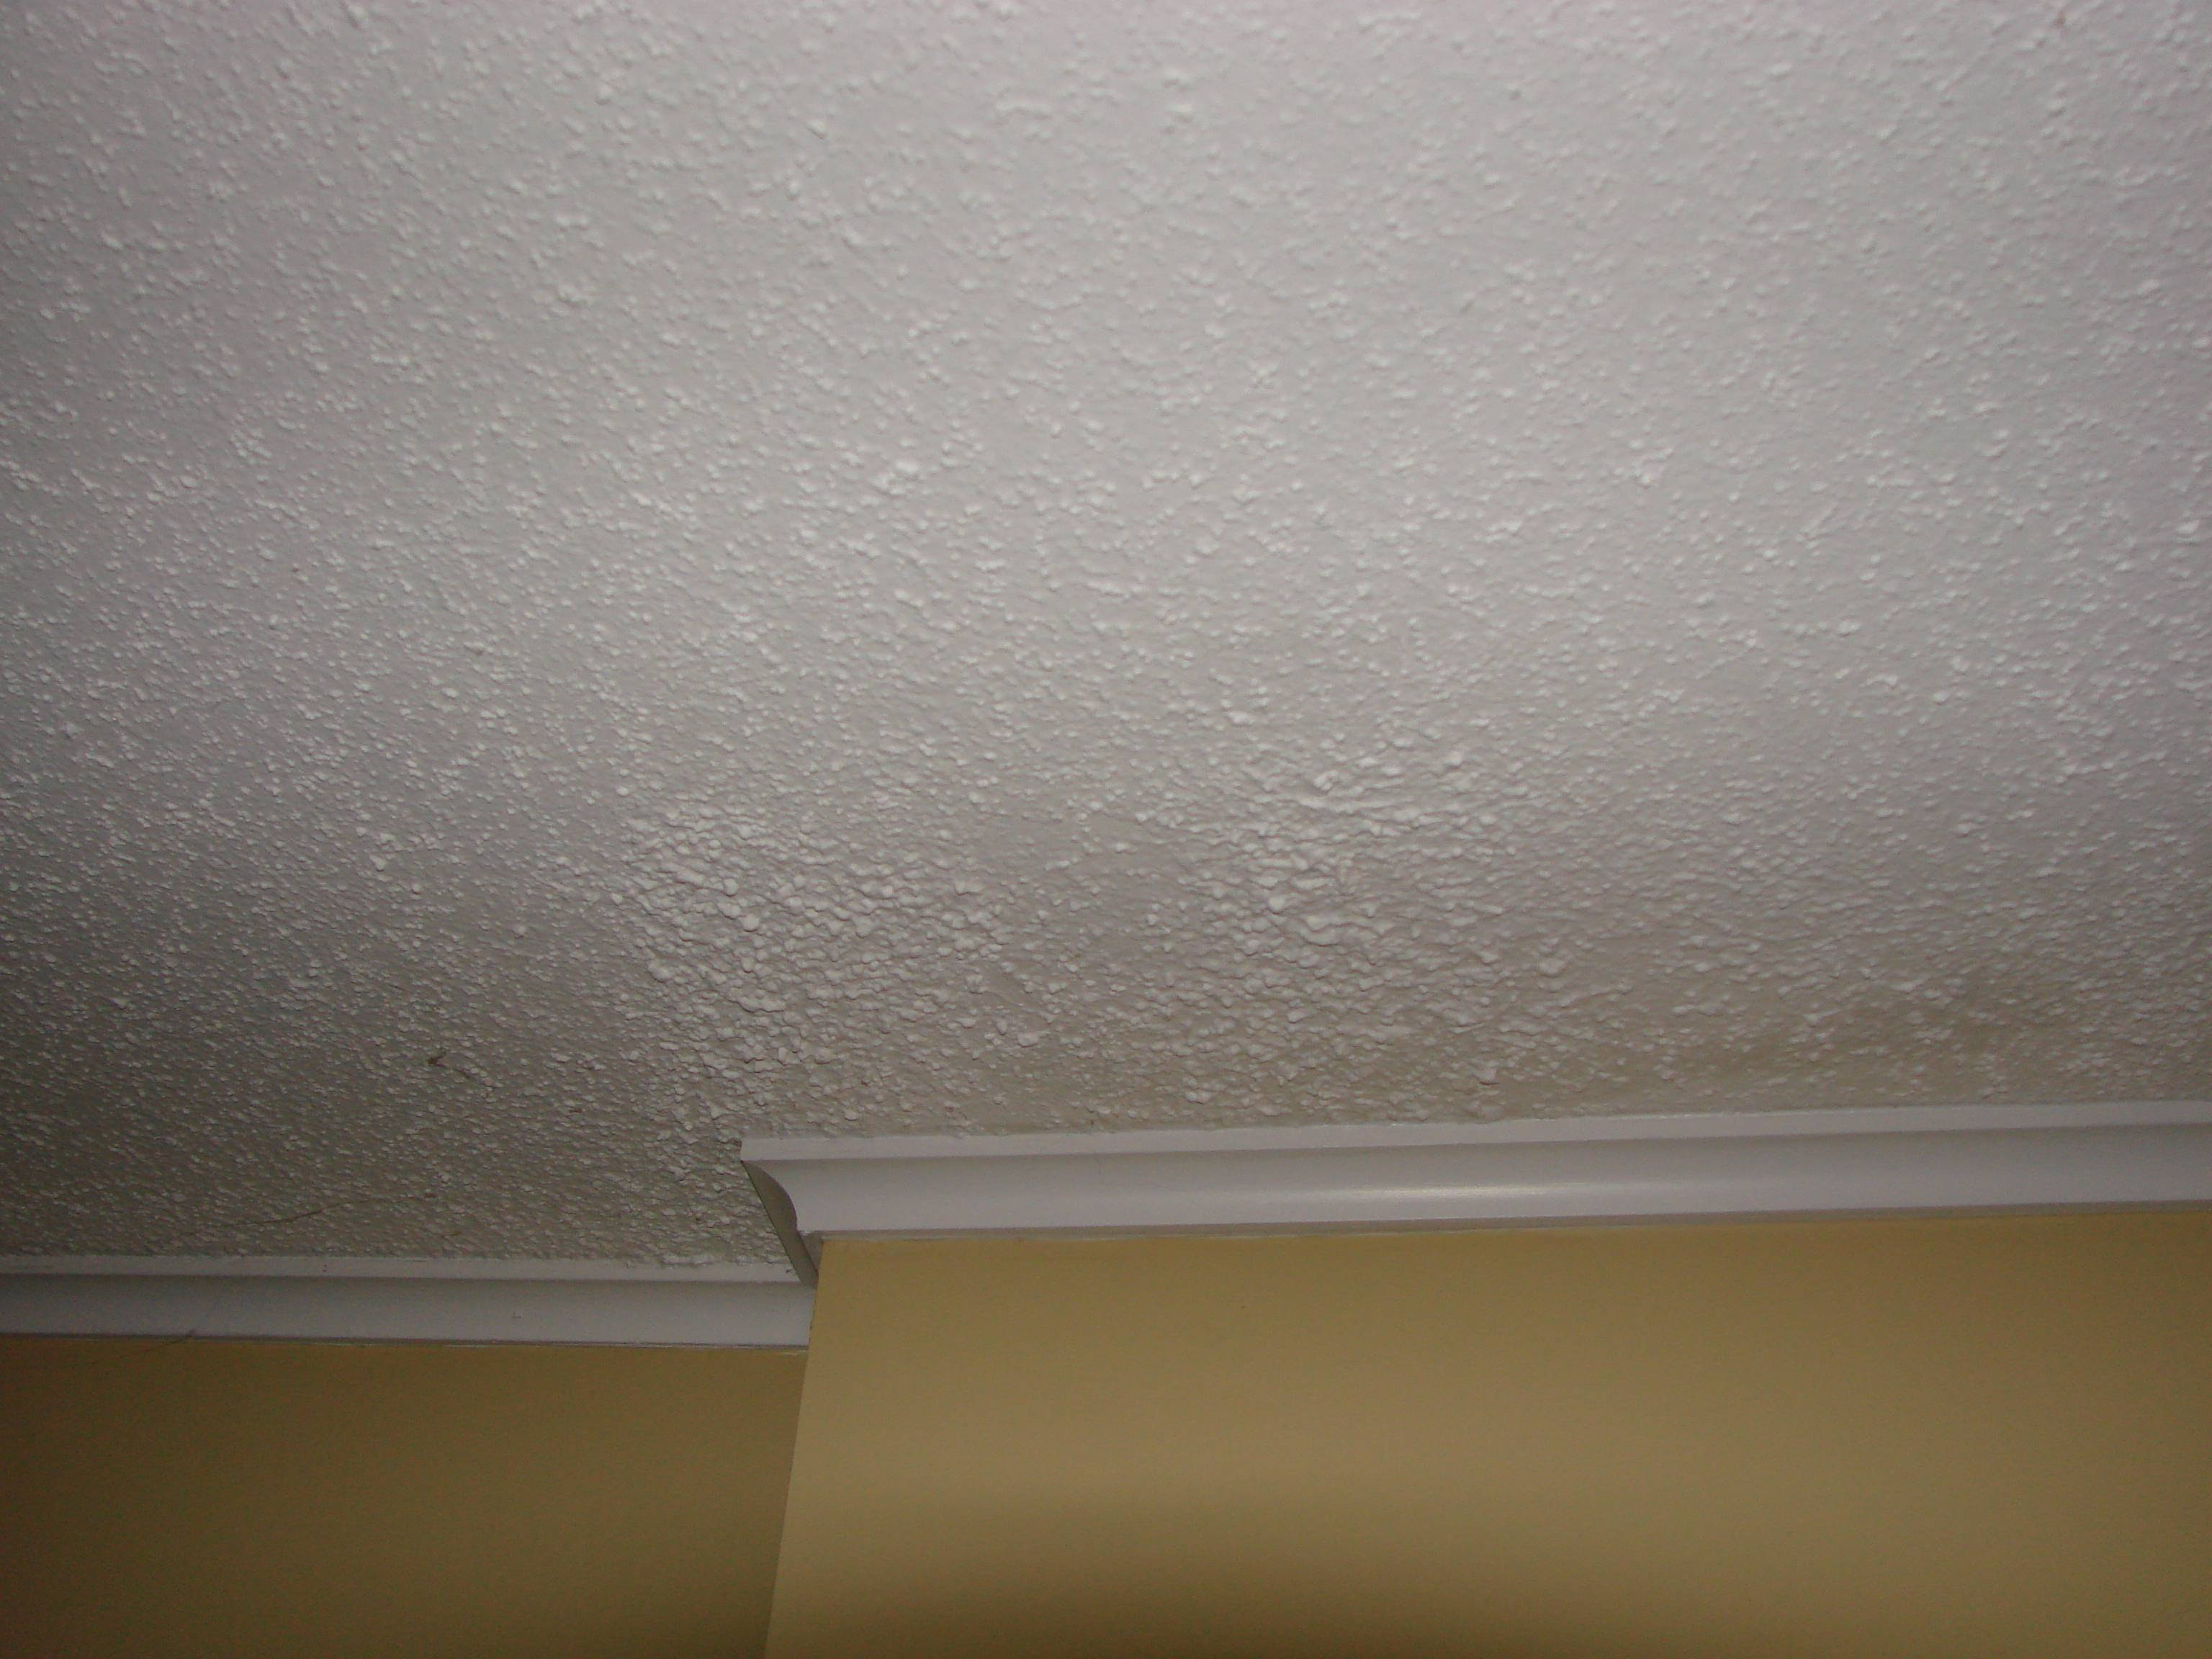 How Do You Paint Over Popcorn Ceilings